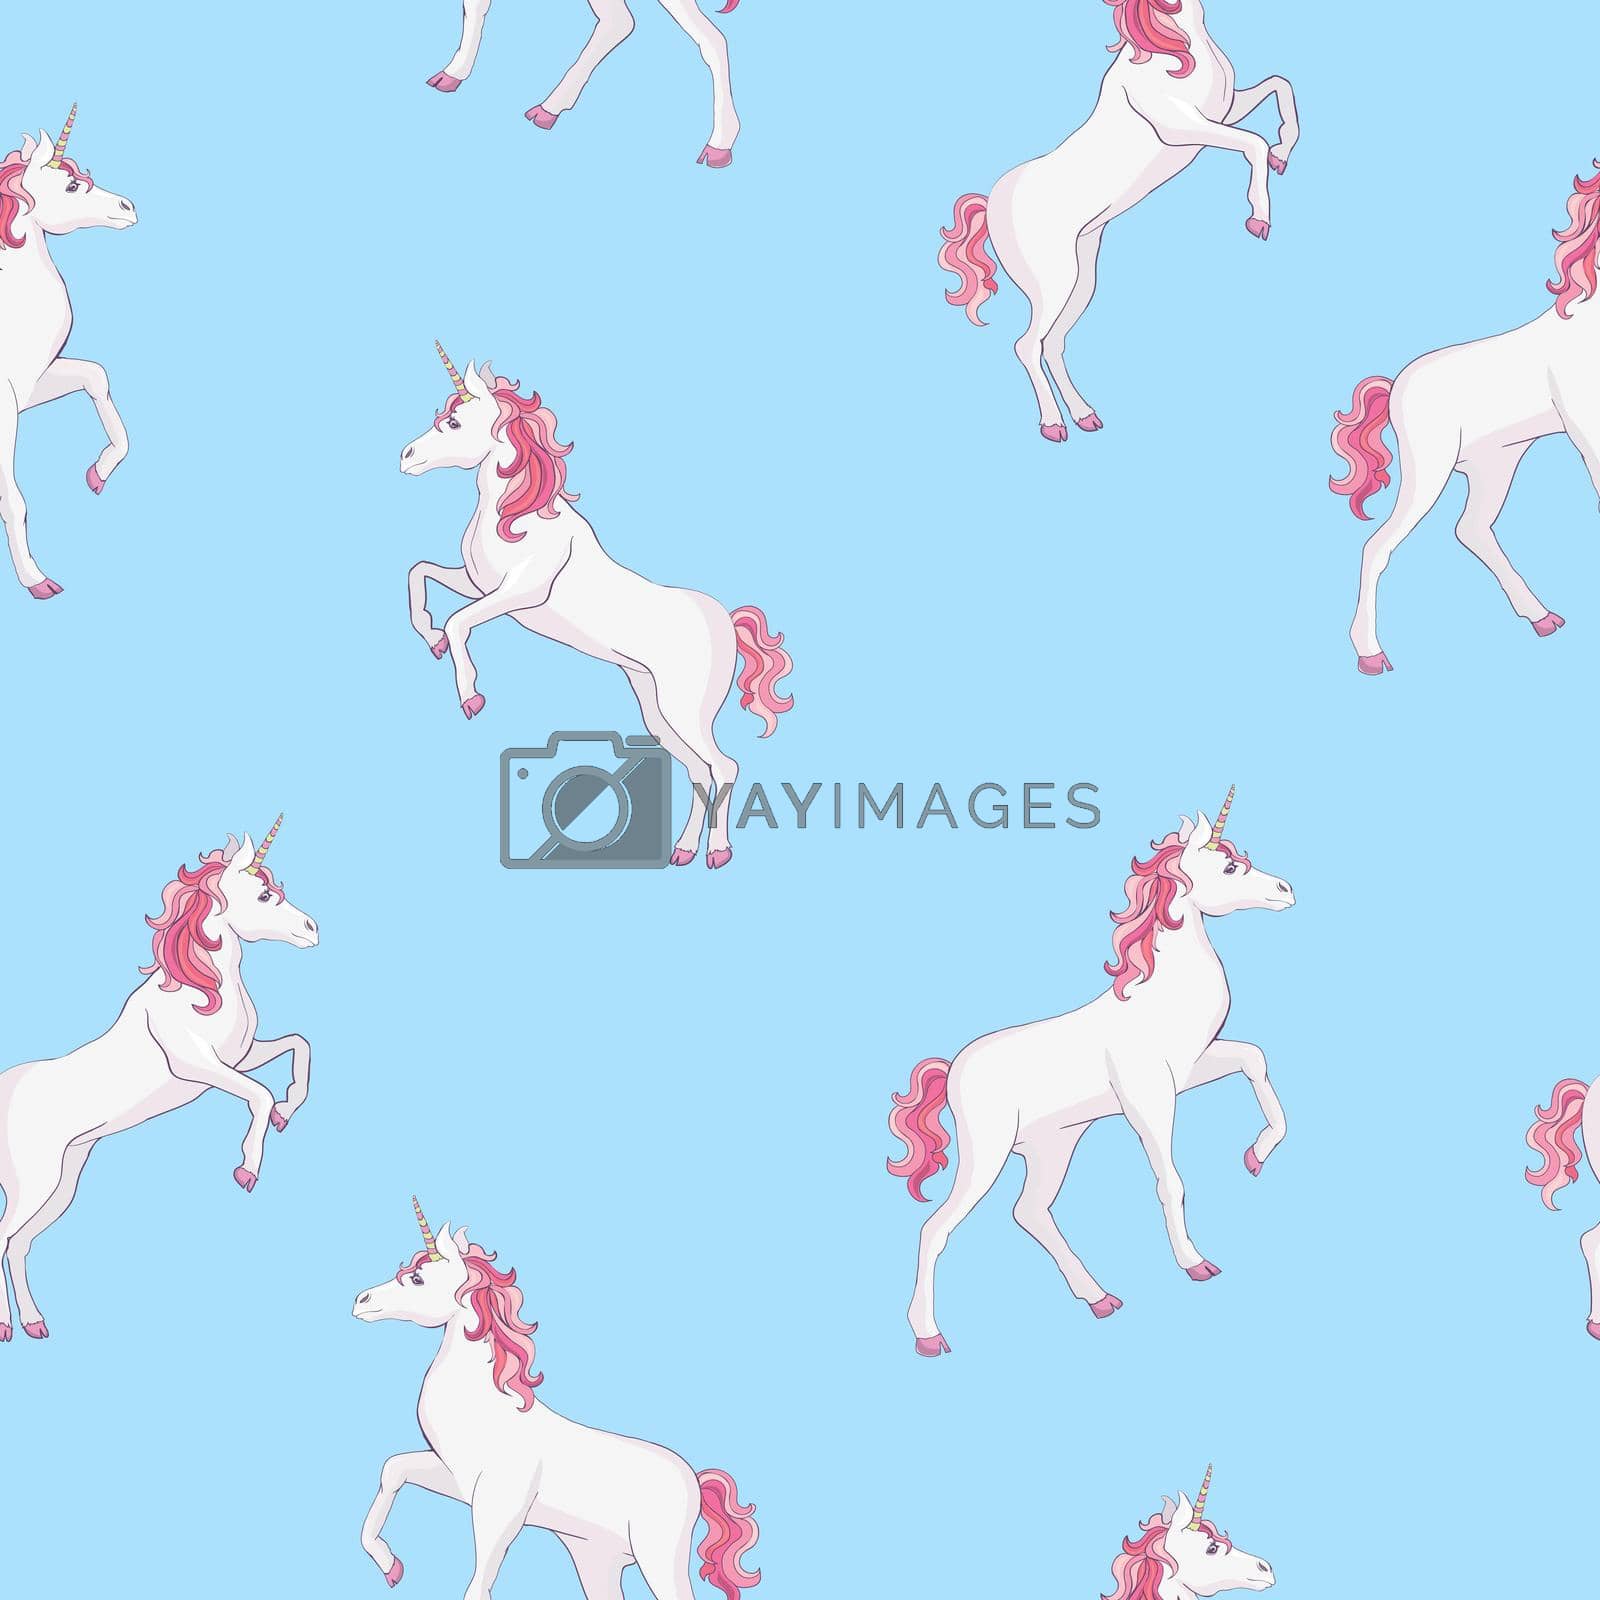 Royalty free image of Unicorn seamless pattern. Unicorns with rainbow mane and horn on flat purple background with stars. Vector illustration. Cute magic fantasy wallpaper with white unicorn head. by Vladimir90